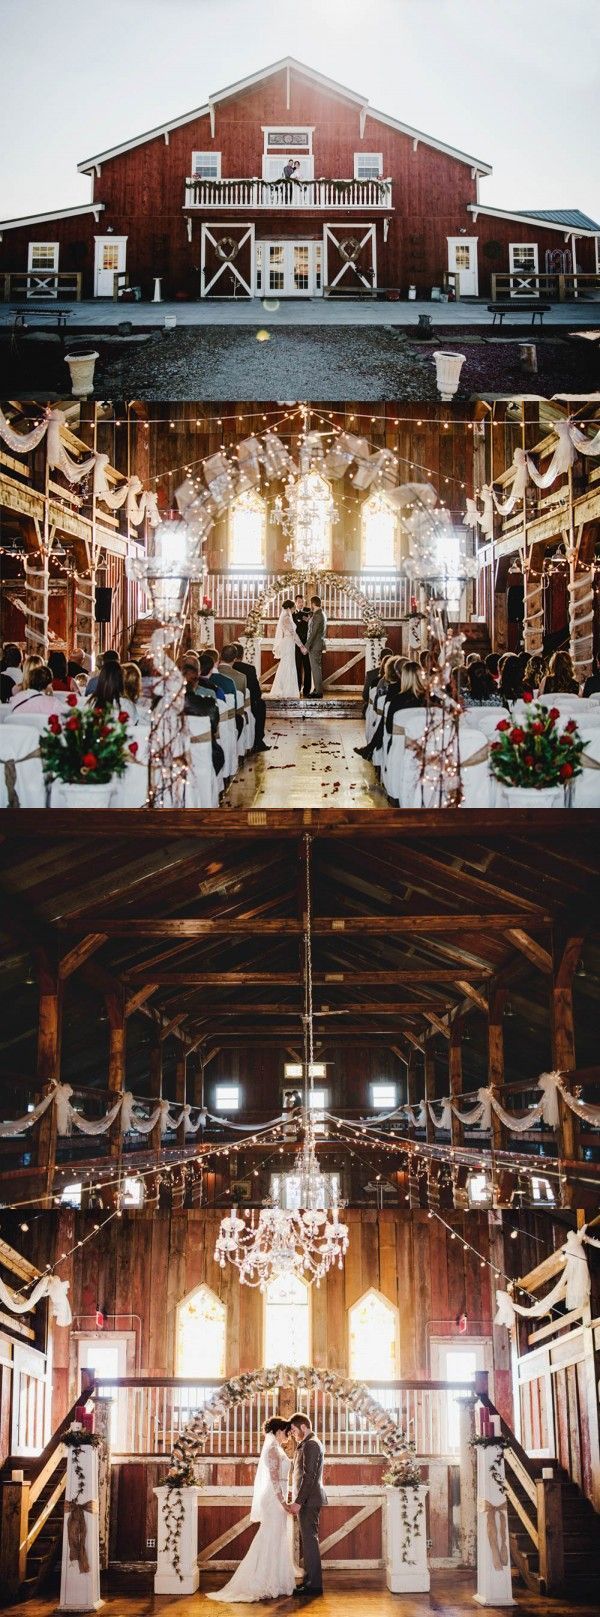 11 of The Most Beautiful Barn Venues For Getting Hitched -   14 wedding Venues barn ideas